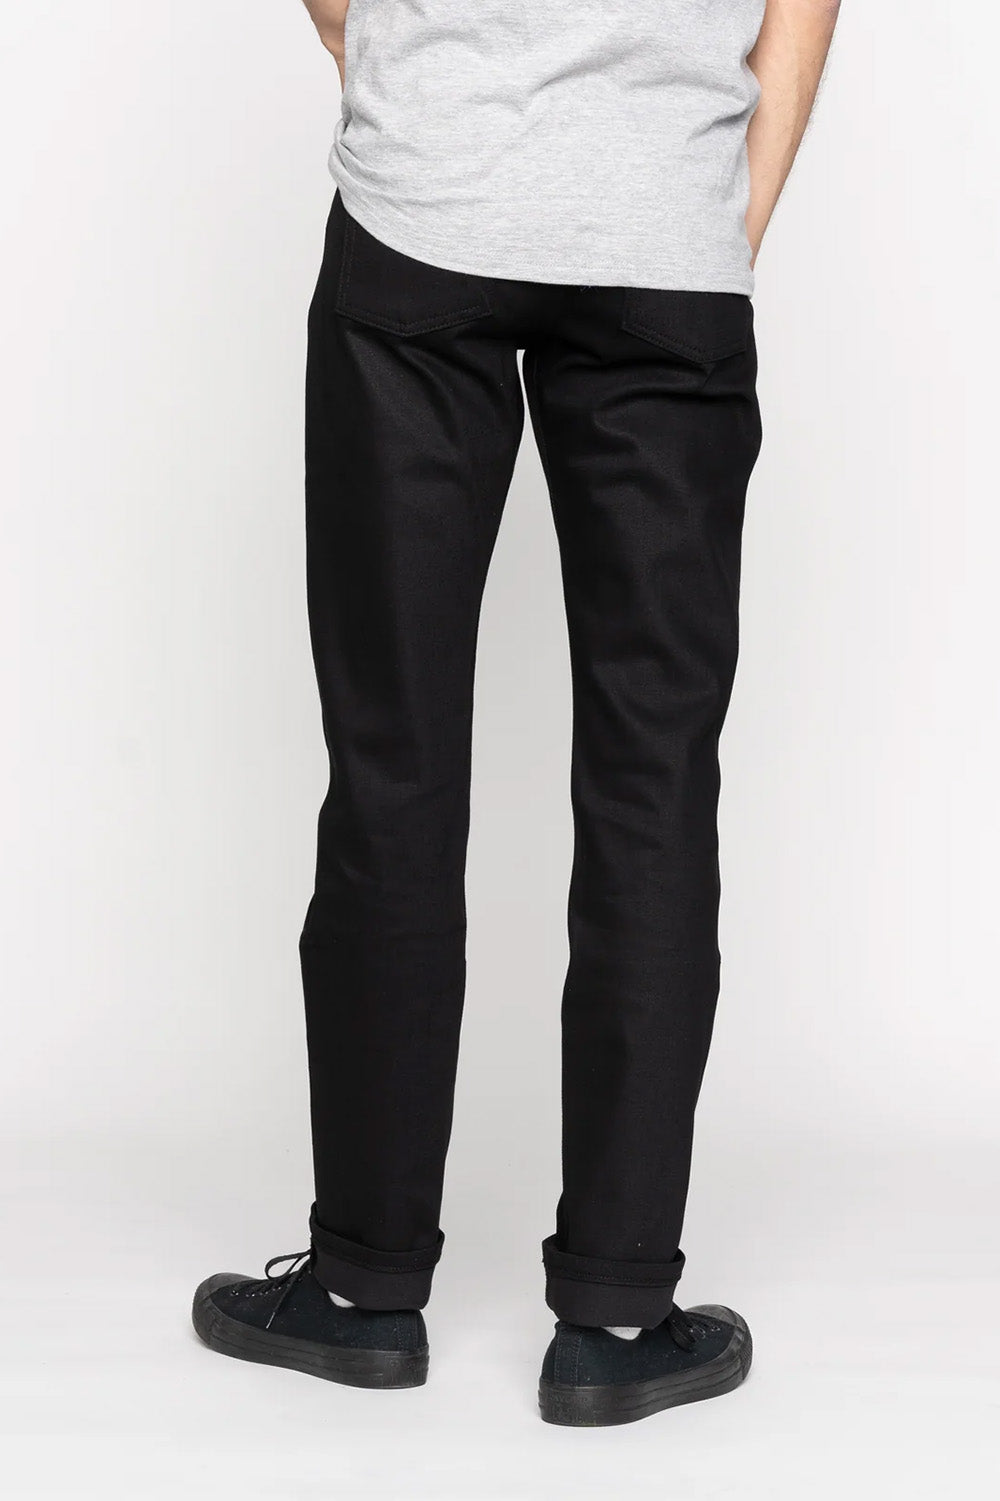 Naked & Famous - Weird Guy - Black Comfort Stretch - Back